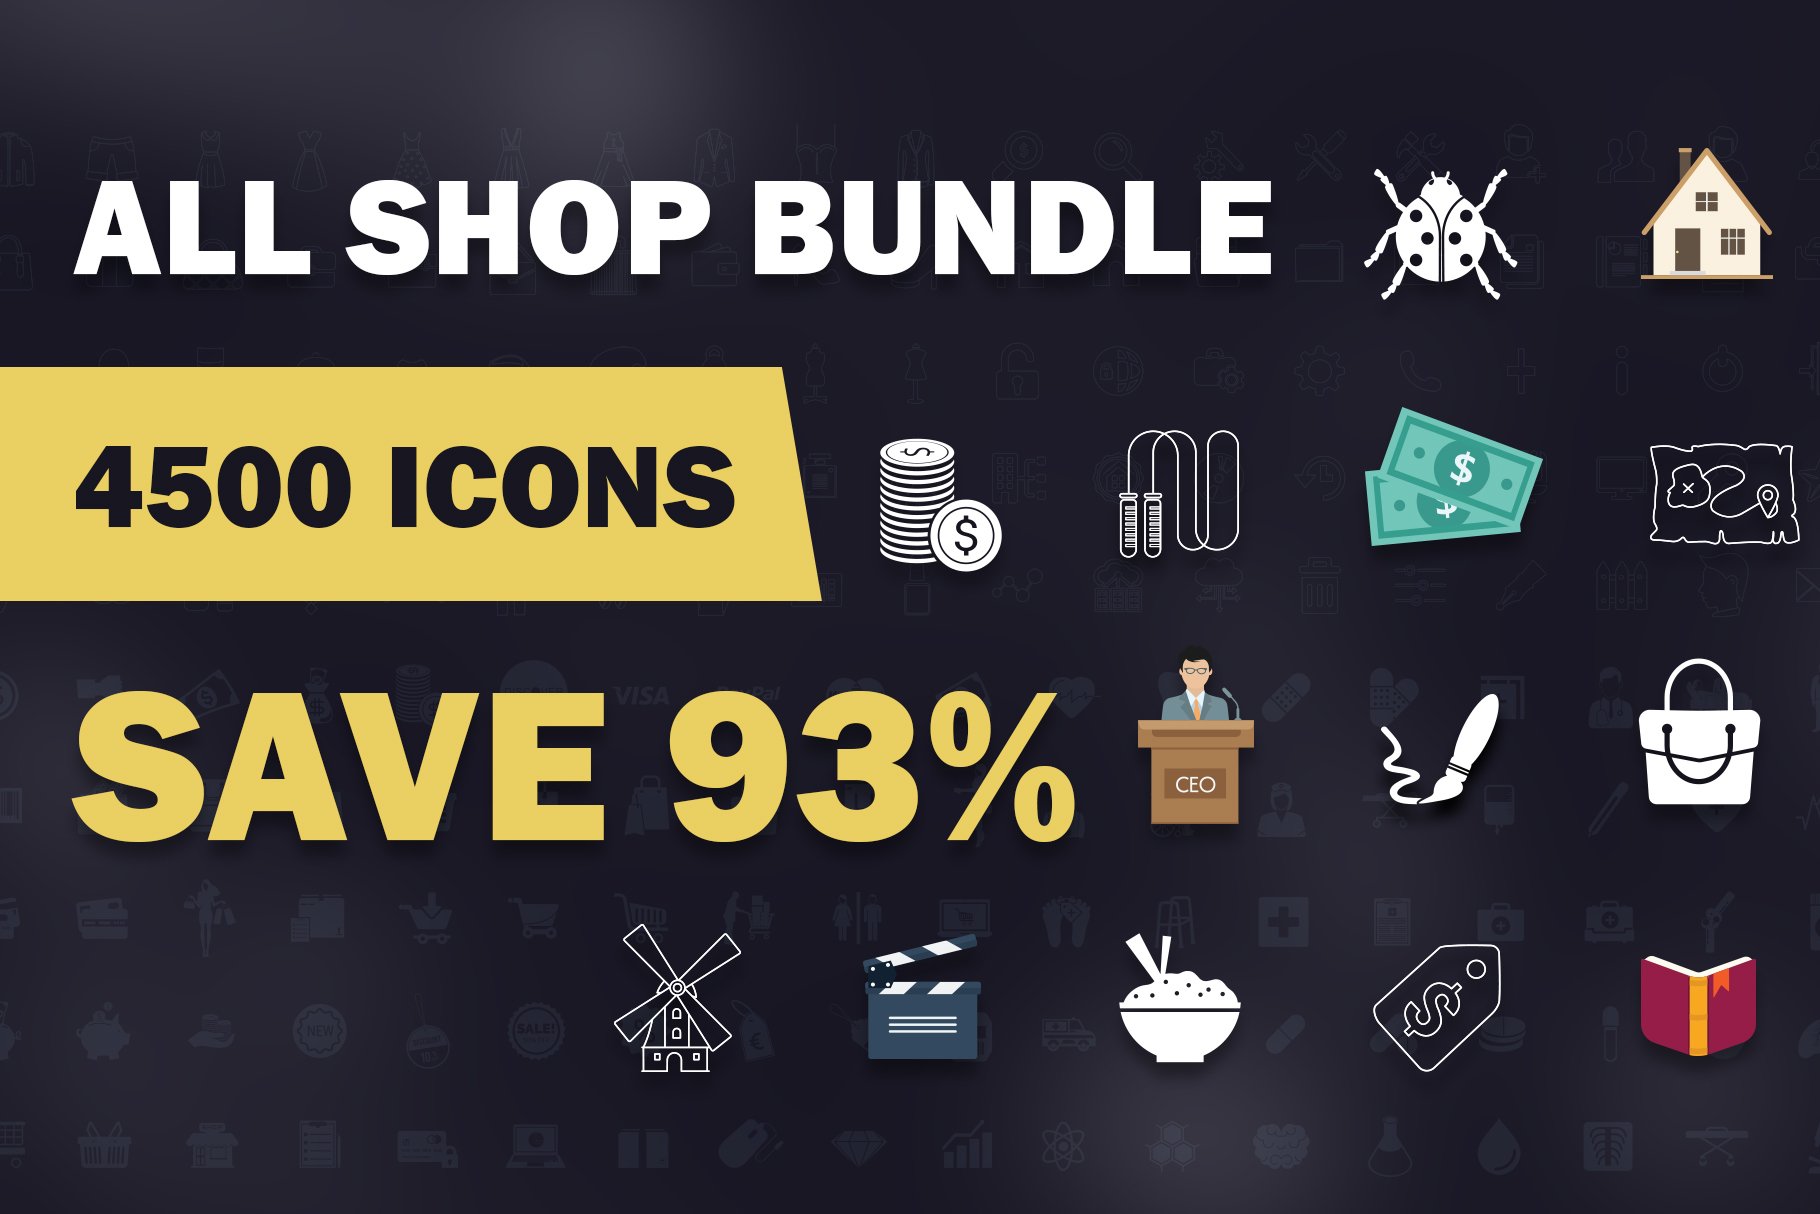 4500 Vector Icons Bundle cover image.